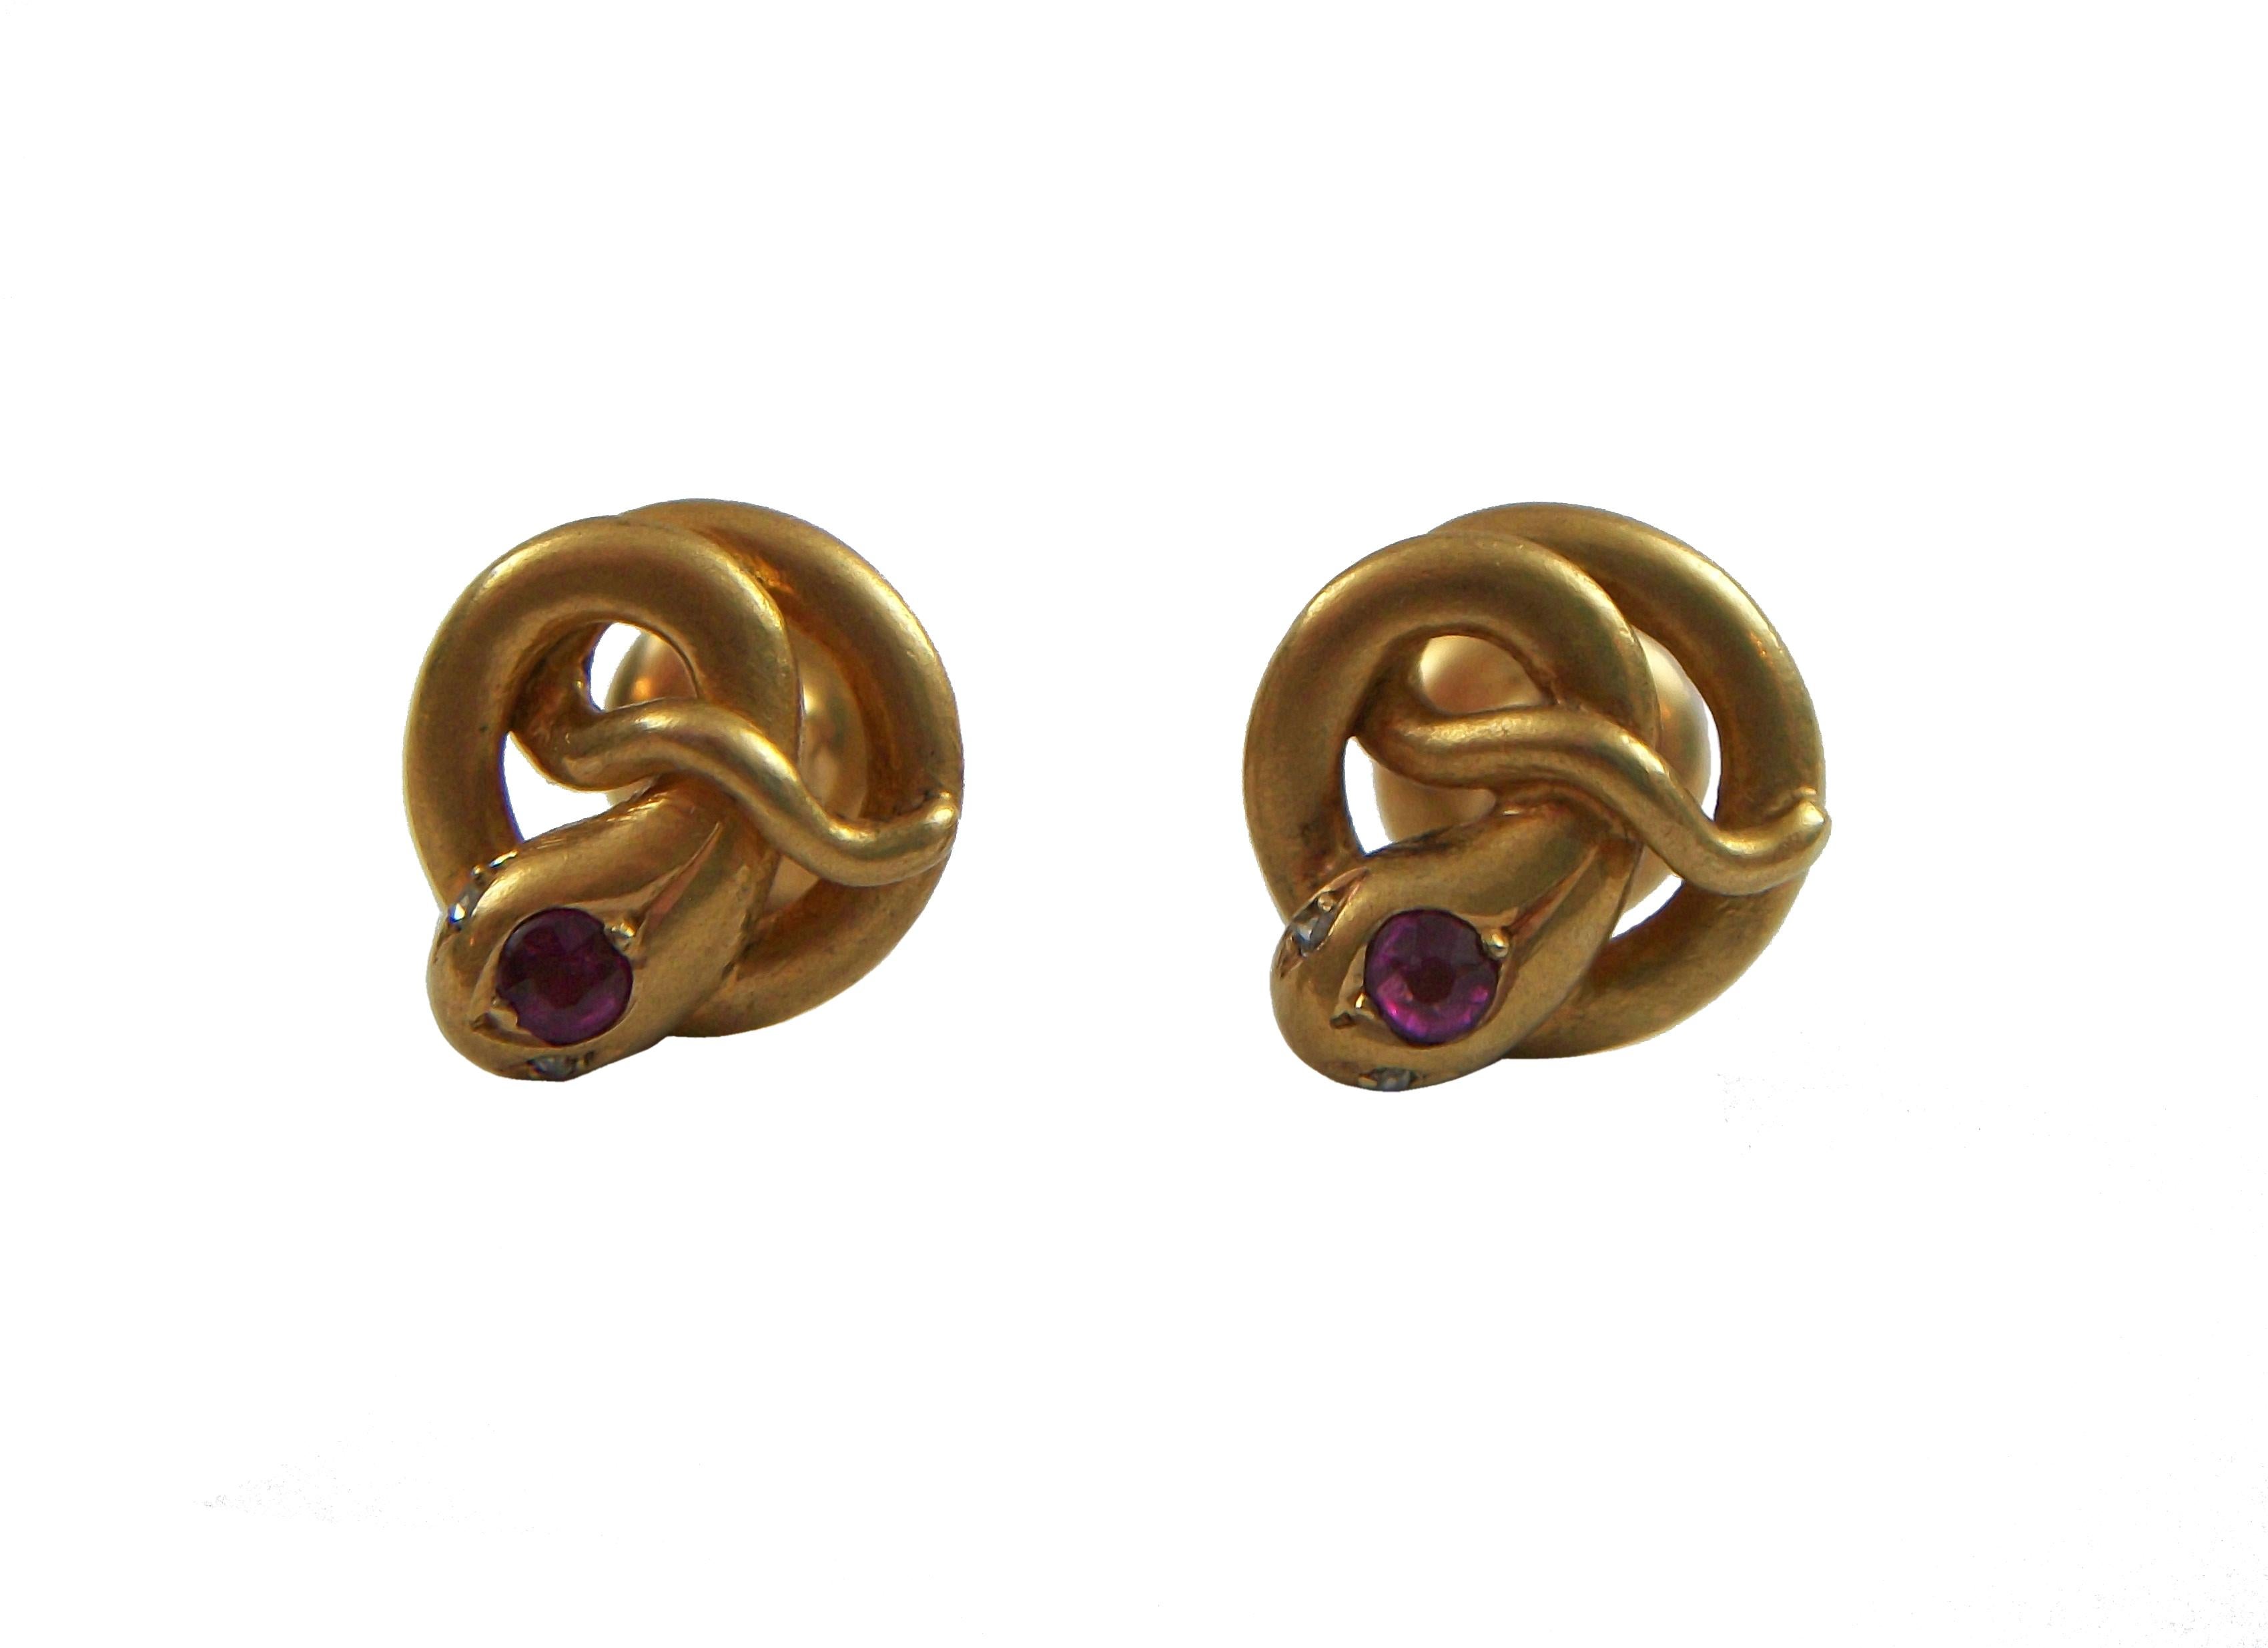 Exceptional pair of antique 18K yellow gold snake buttons - featuring coiled snakes to each button front (signifying eternal love and commitment) with a single ruby to each snake head (approx. 0.20 Total Carat Weight - 0.102 each) - small rose cut